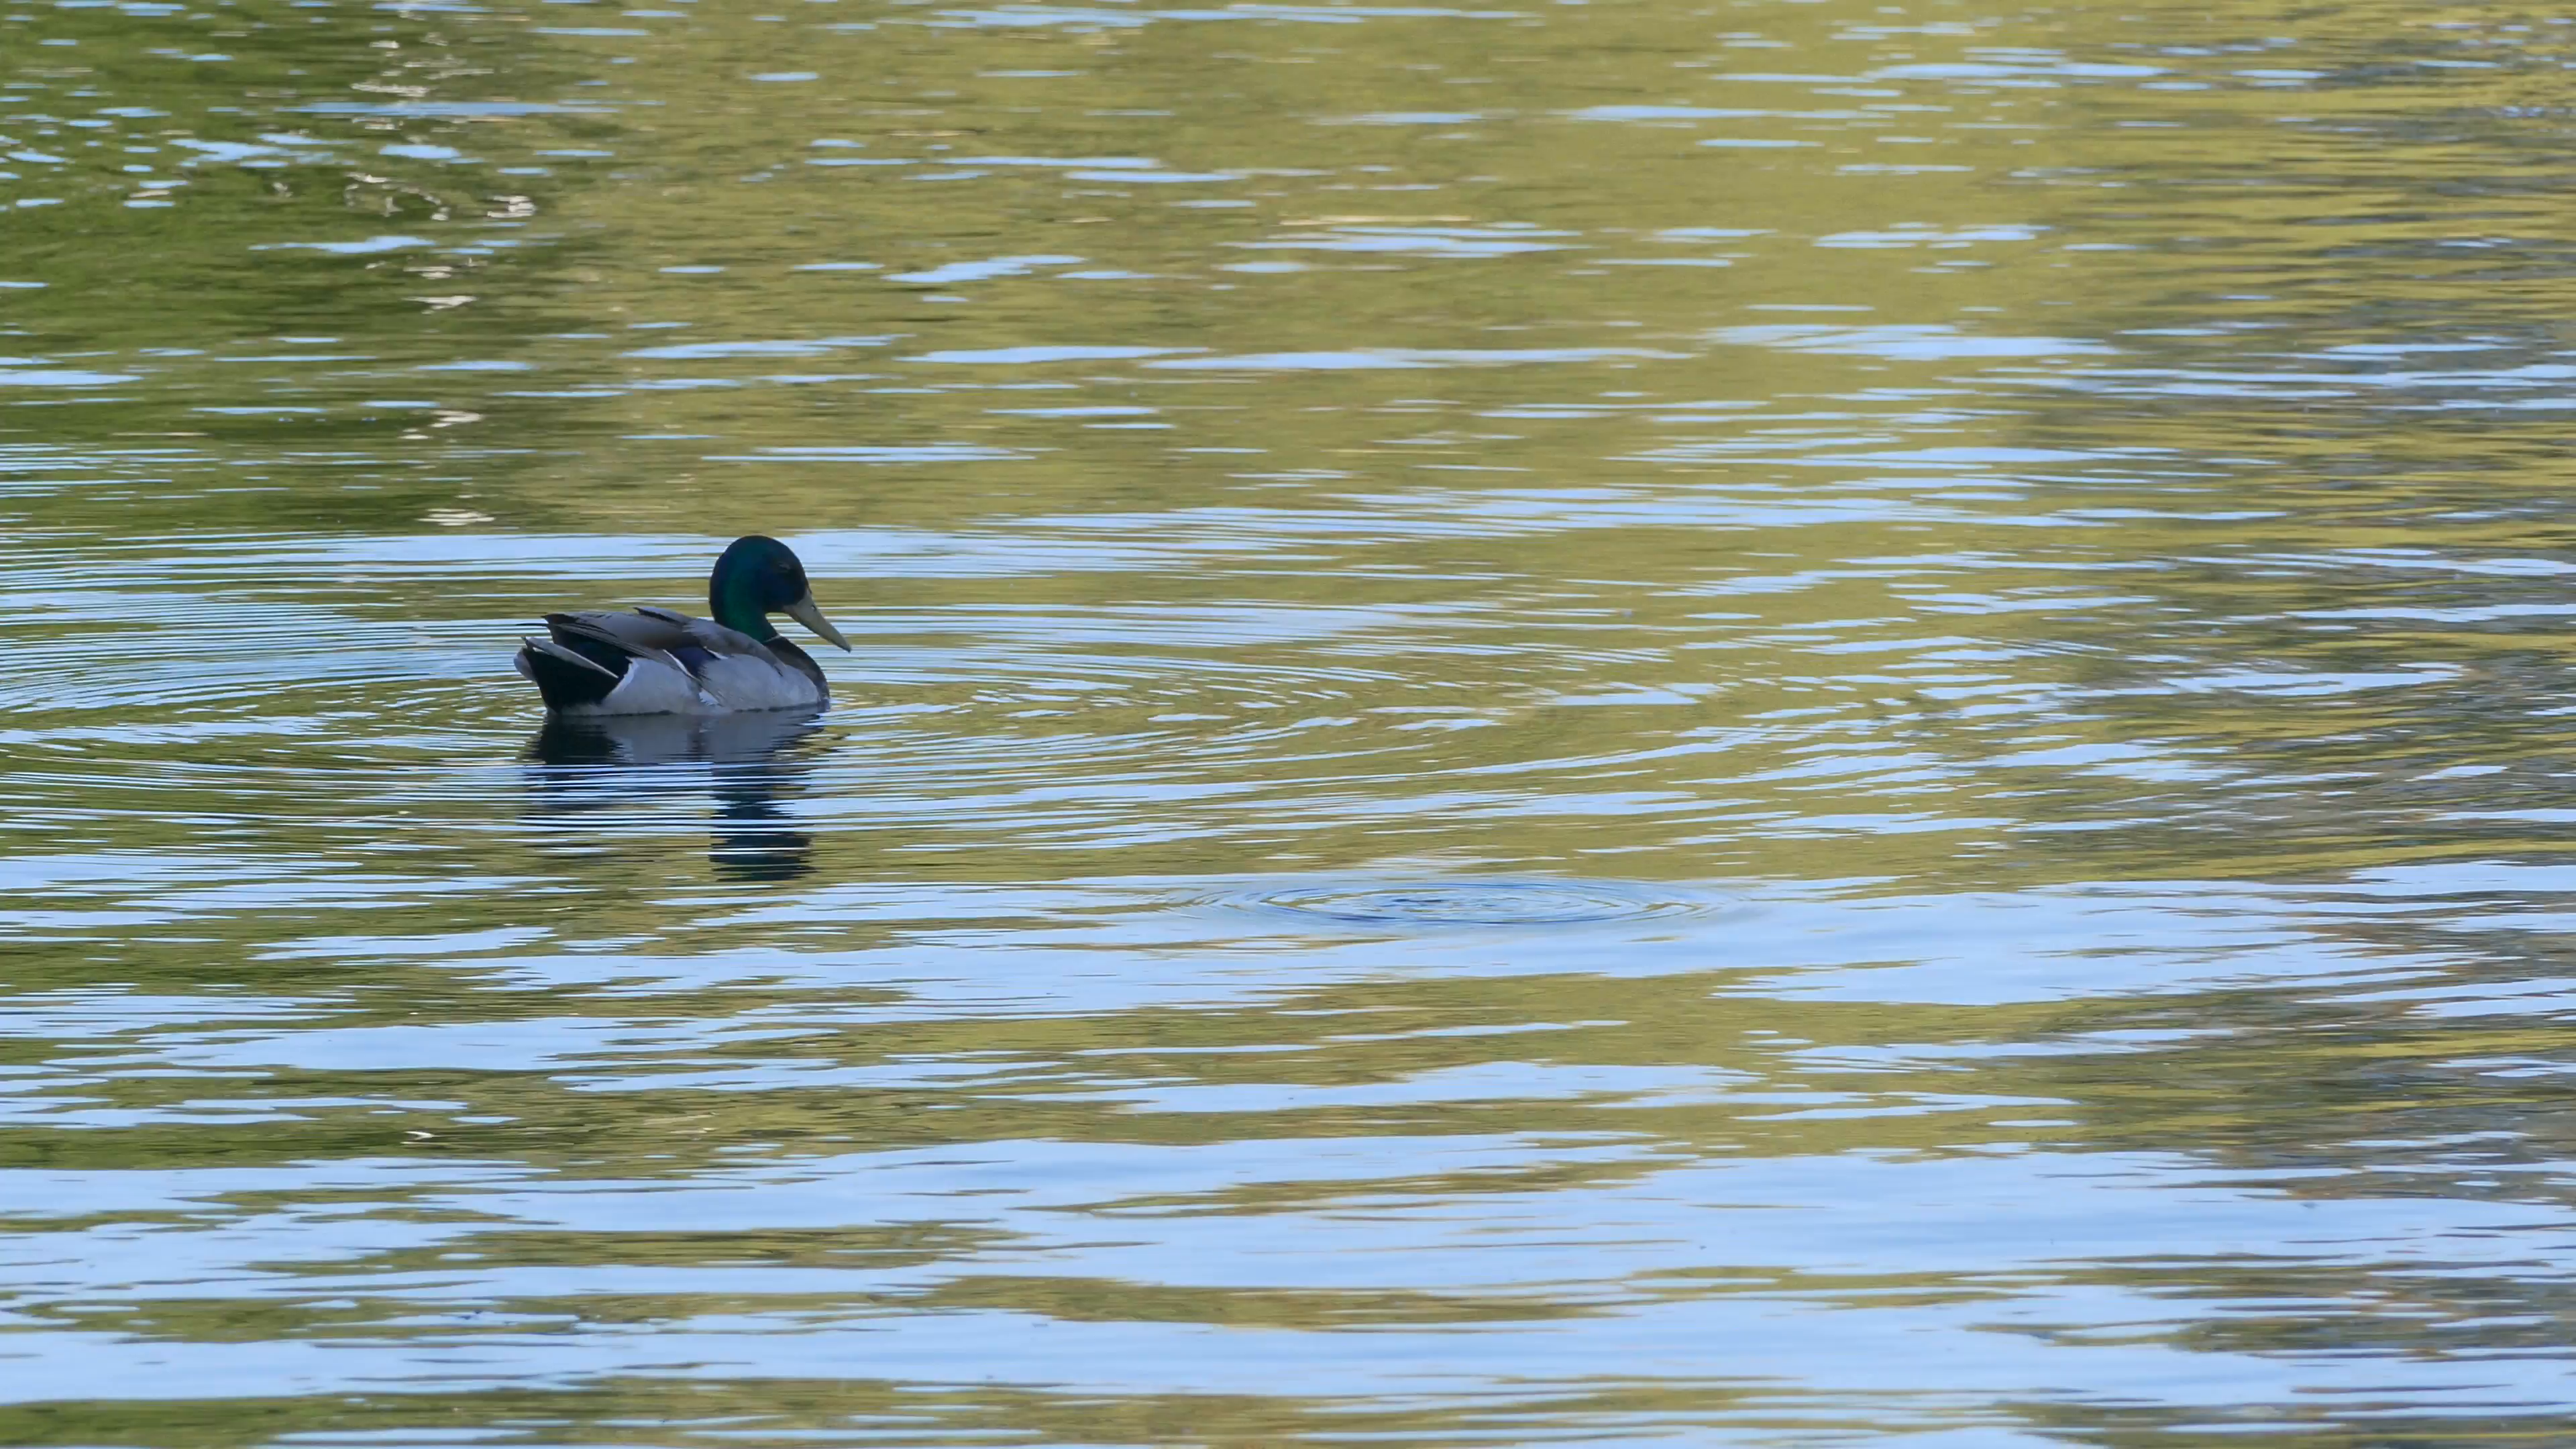 Ungraded: Three ducks swimming in the water, crossing the frame ...